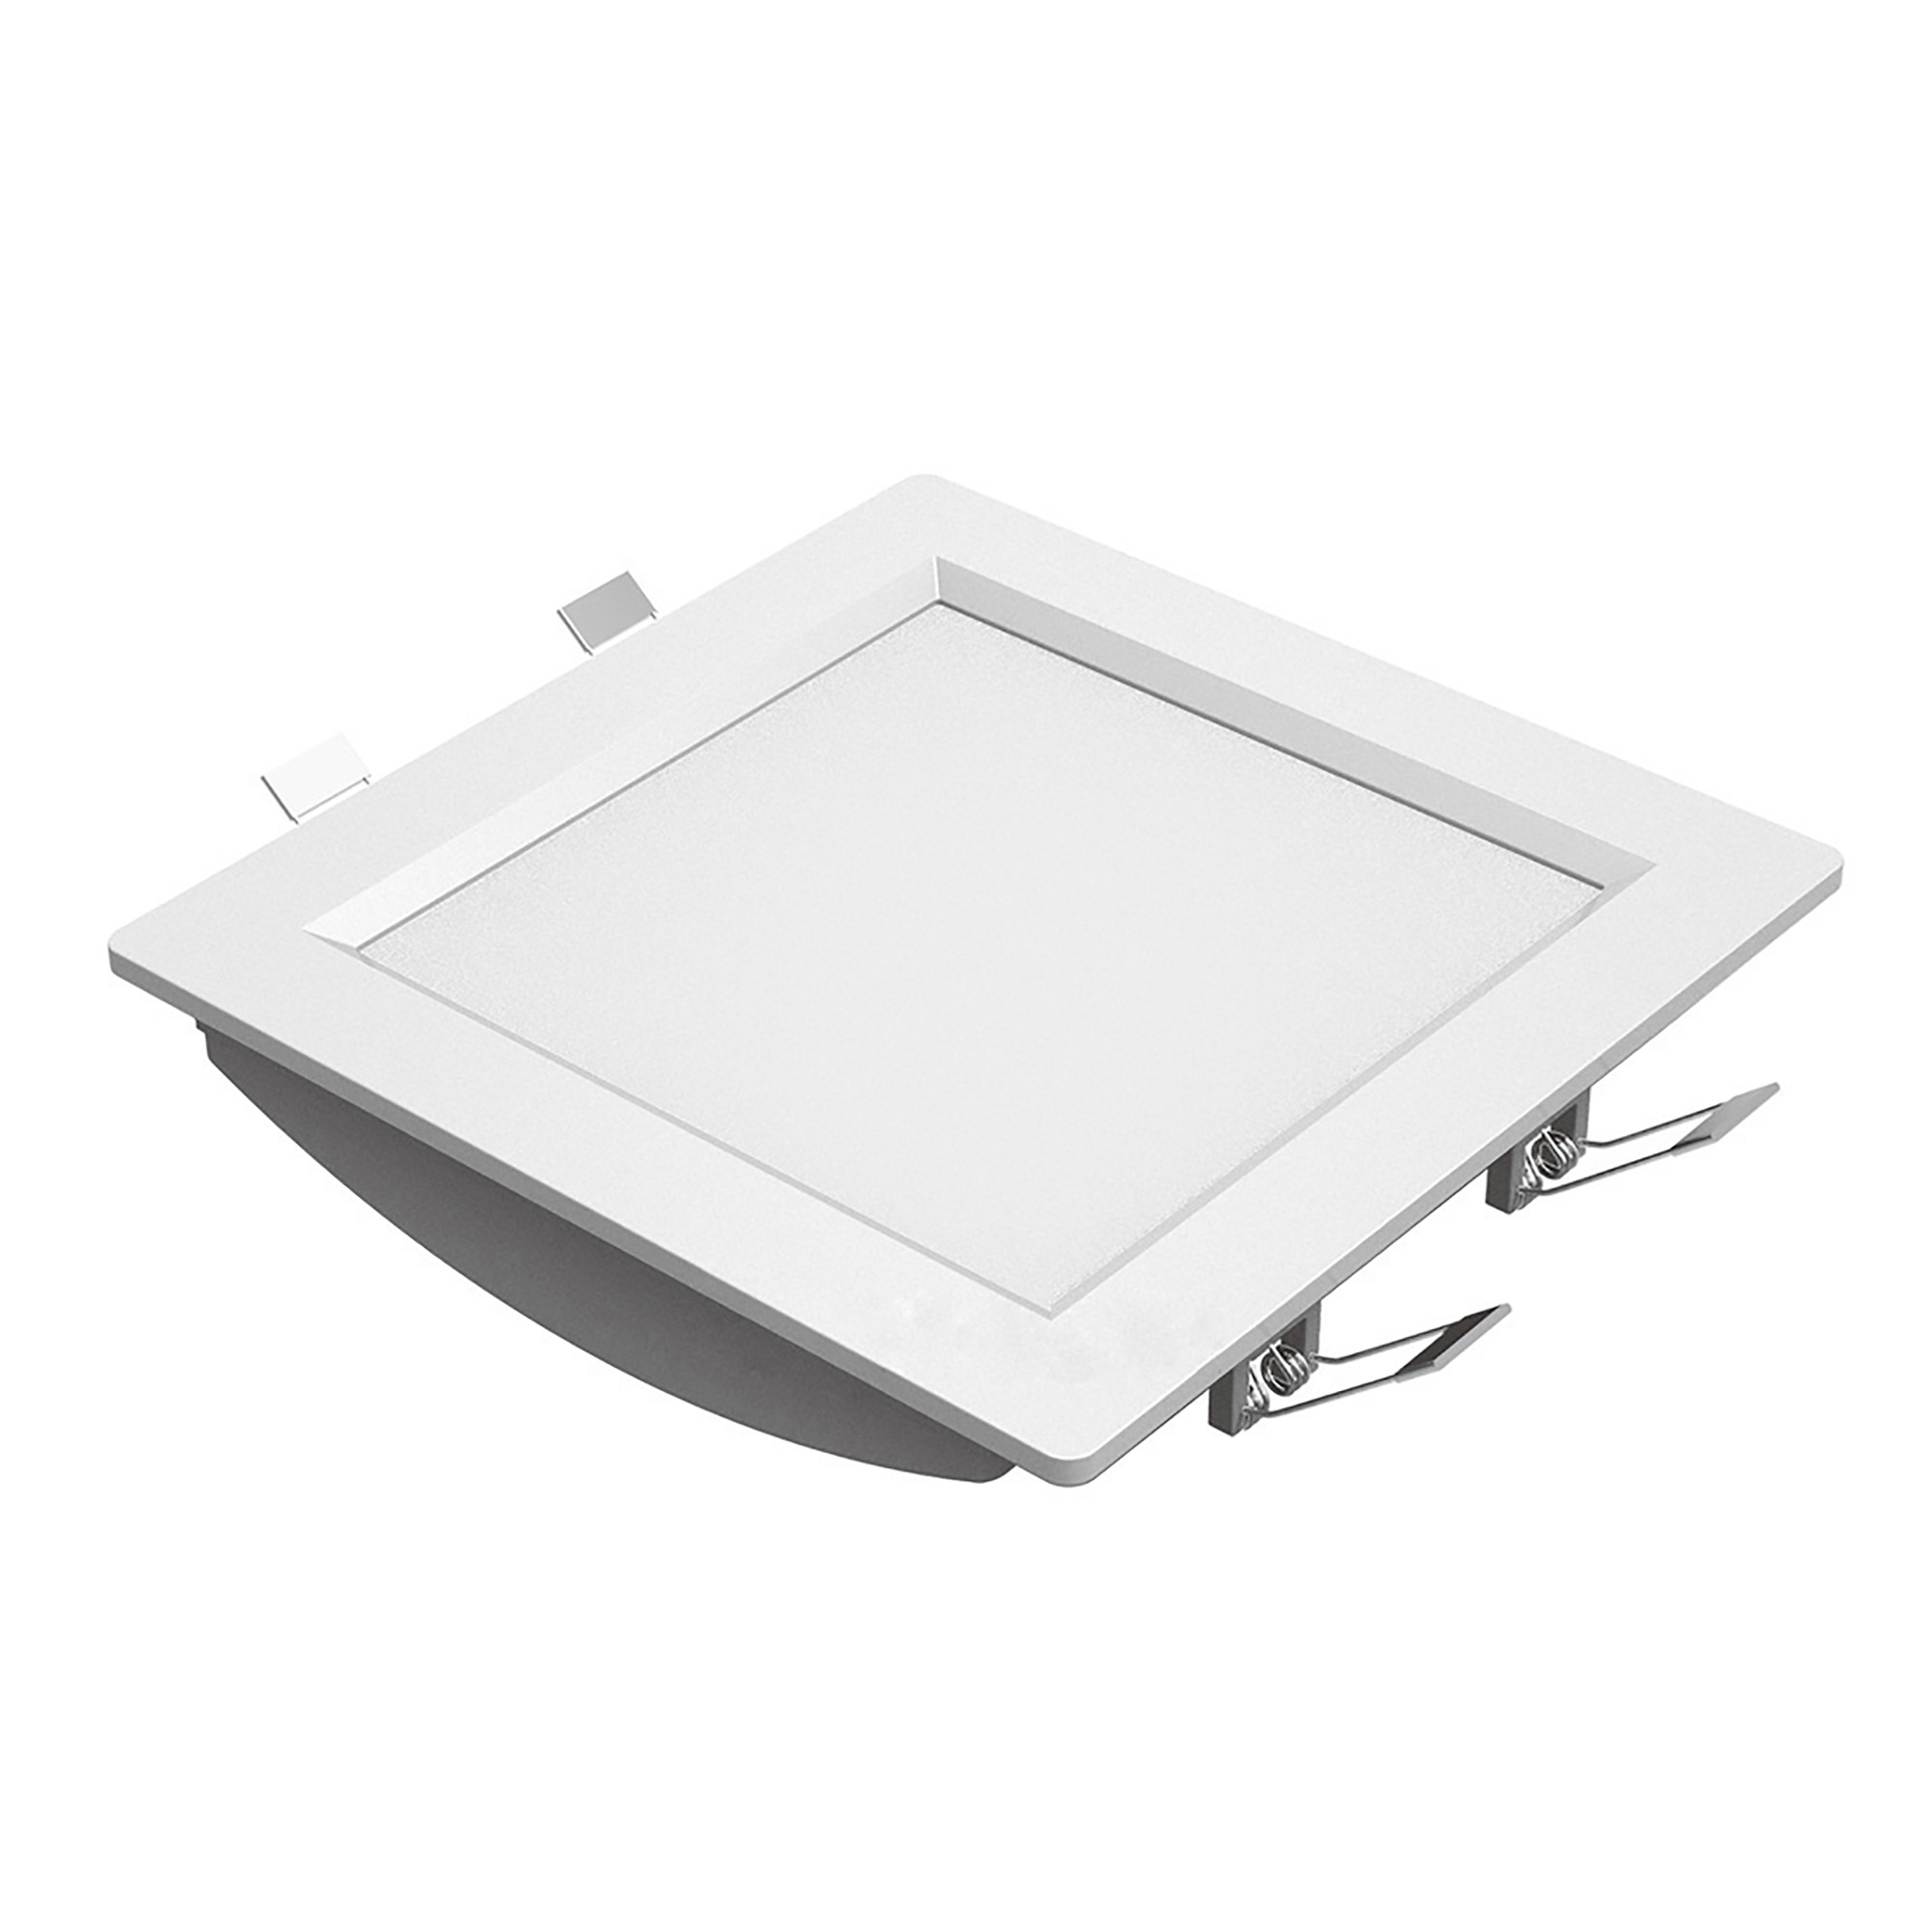 205141  Intego Ultra-Slim Square Large 25W 2700K IP42 Cut-Out 170x170mm